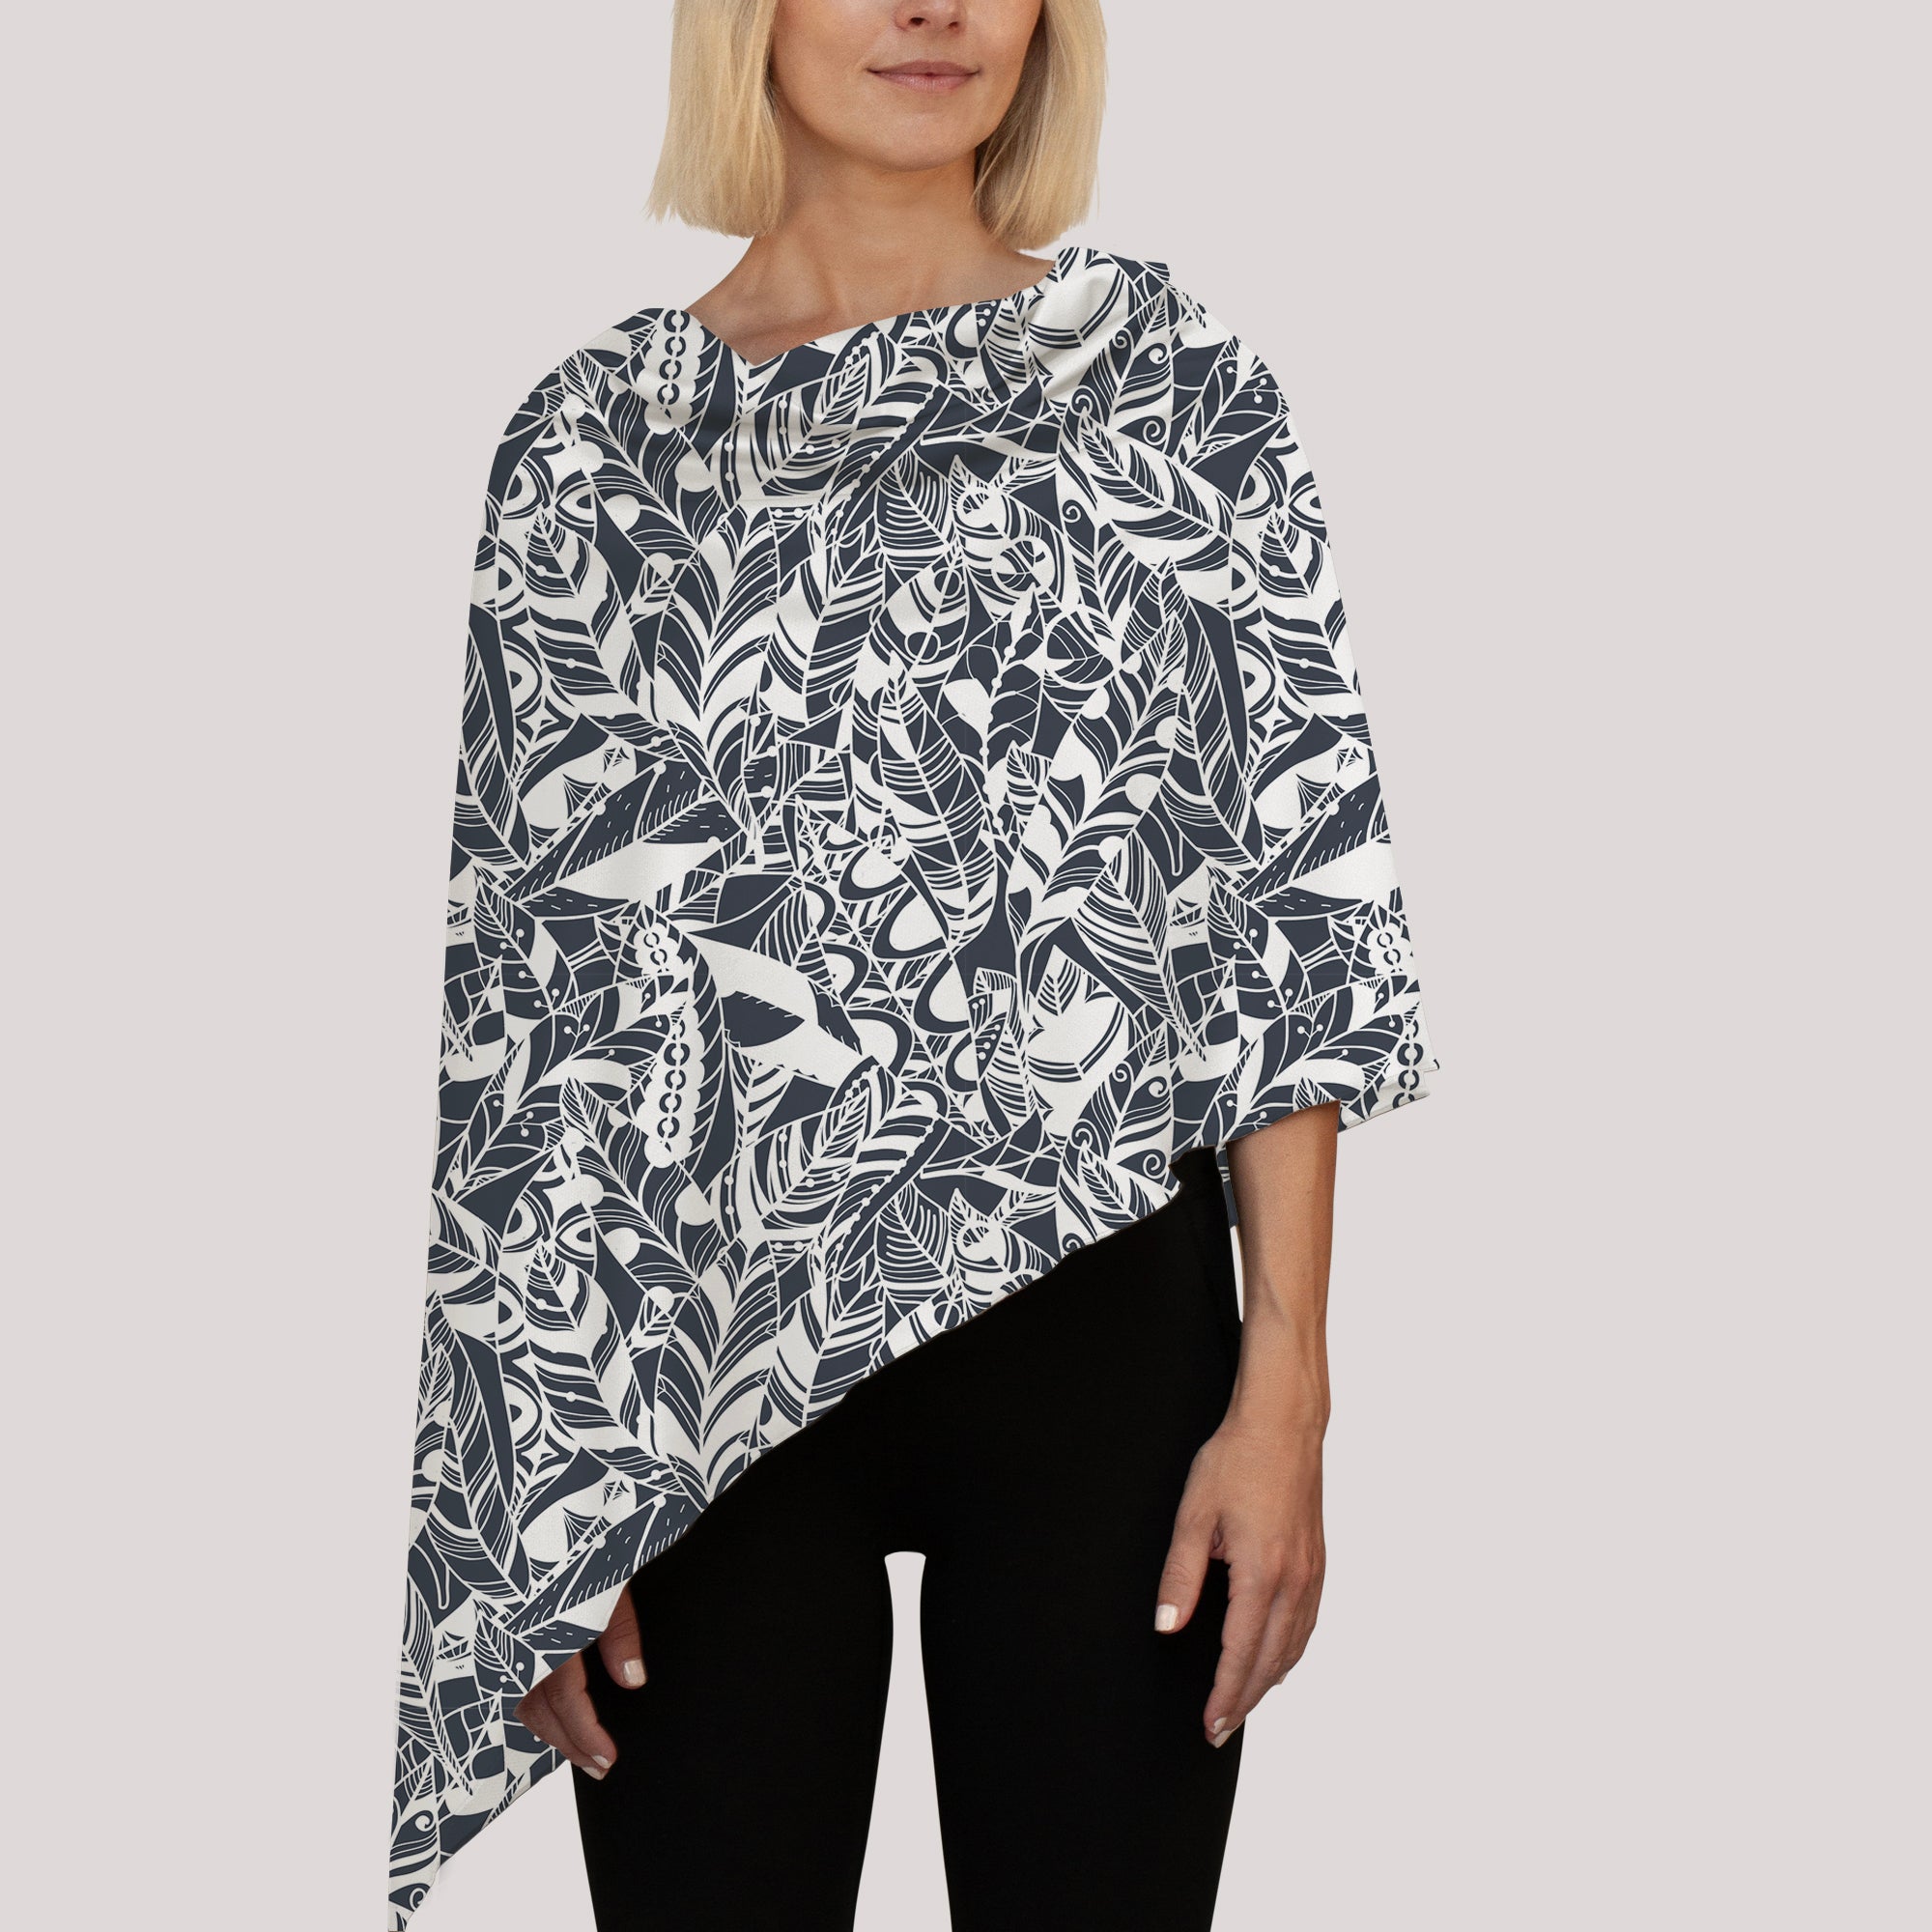 Ladies Poncho Charcoal Tribal UPF50+ sun safe clothing, sun protective clothing for women, sun shirts, sun protection shirts, sun safe clothing, sun protection products Australia